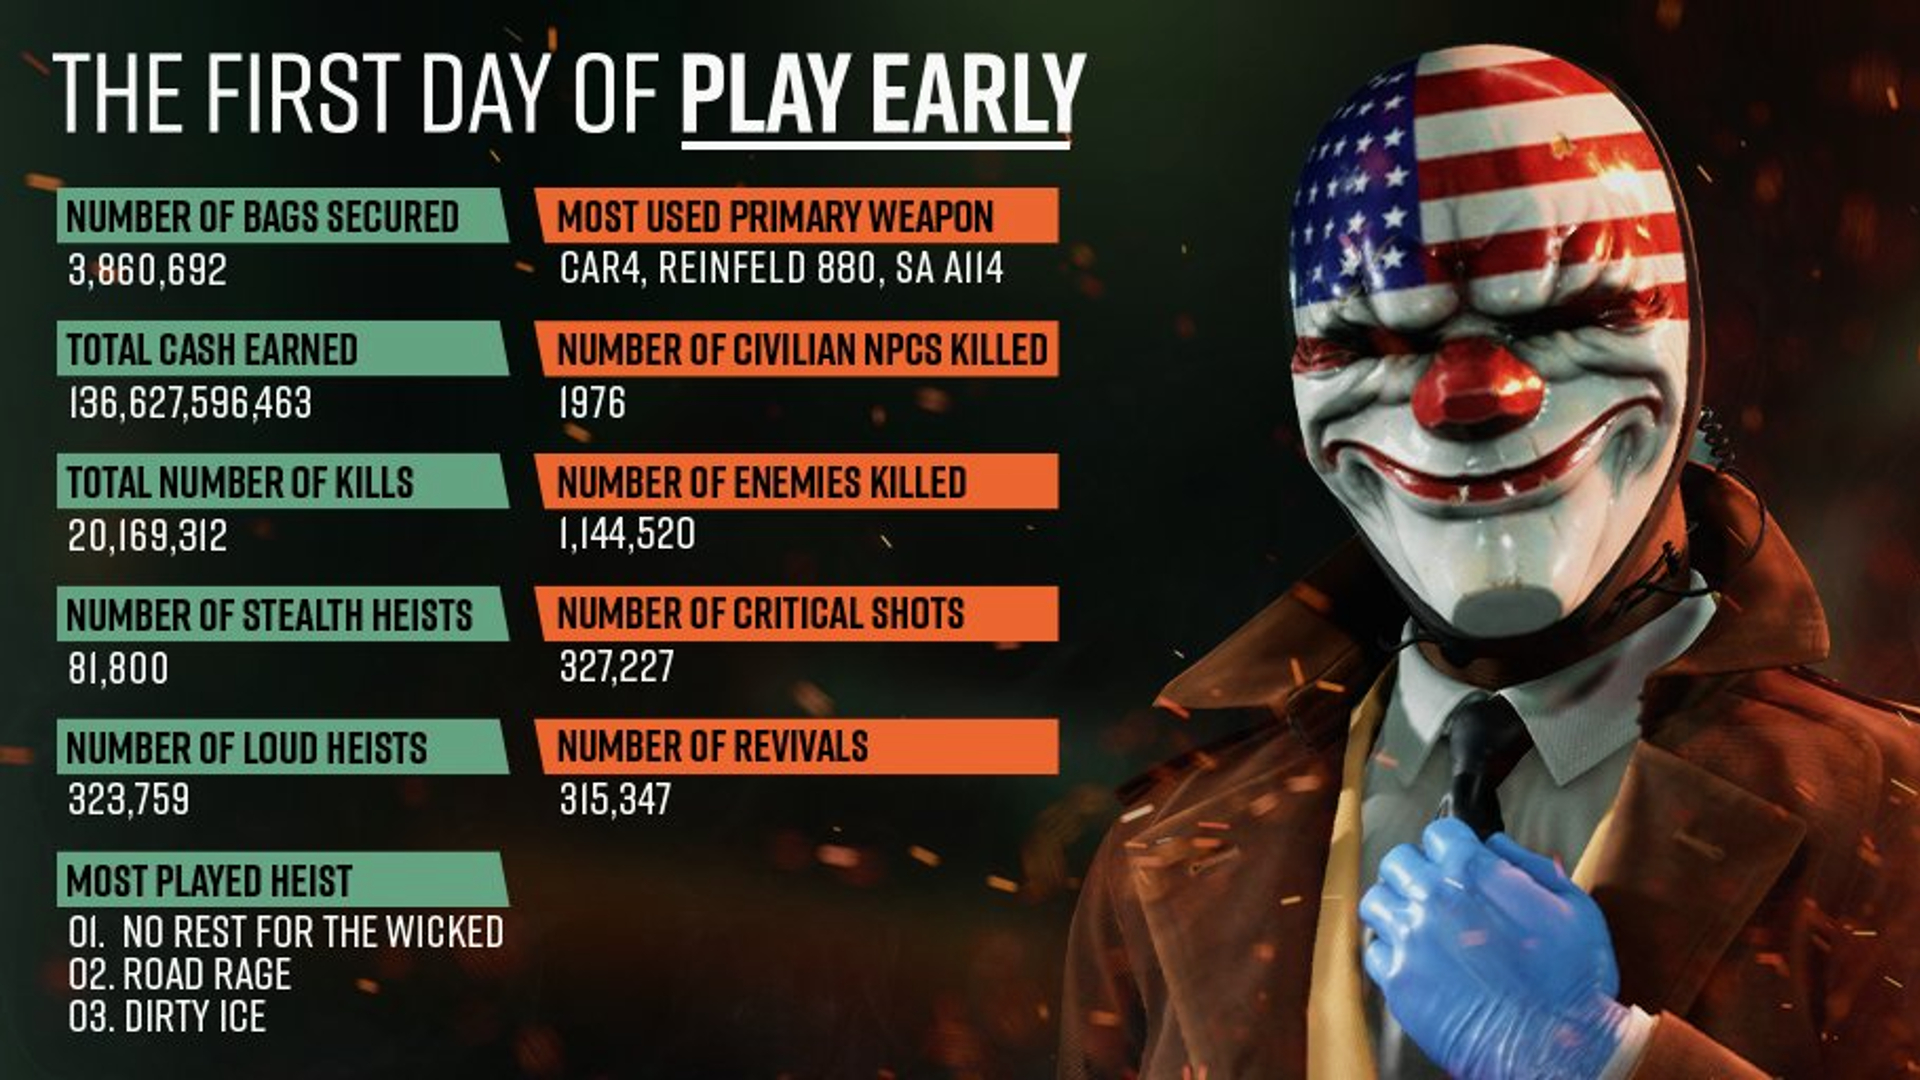 Payday 3 statistics regarding early access players